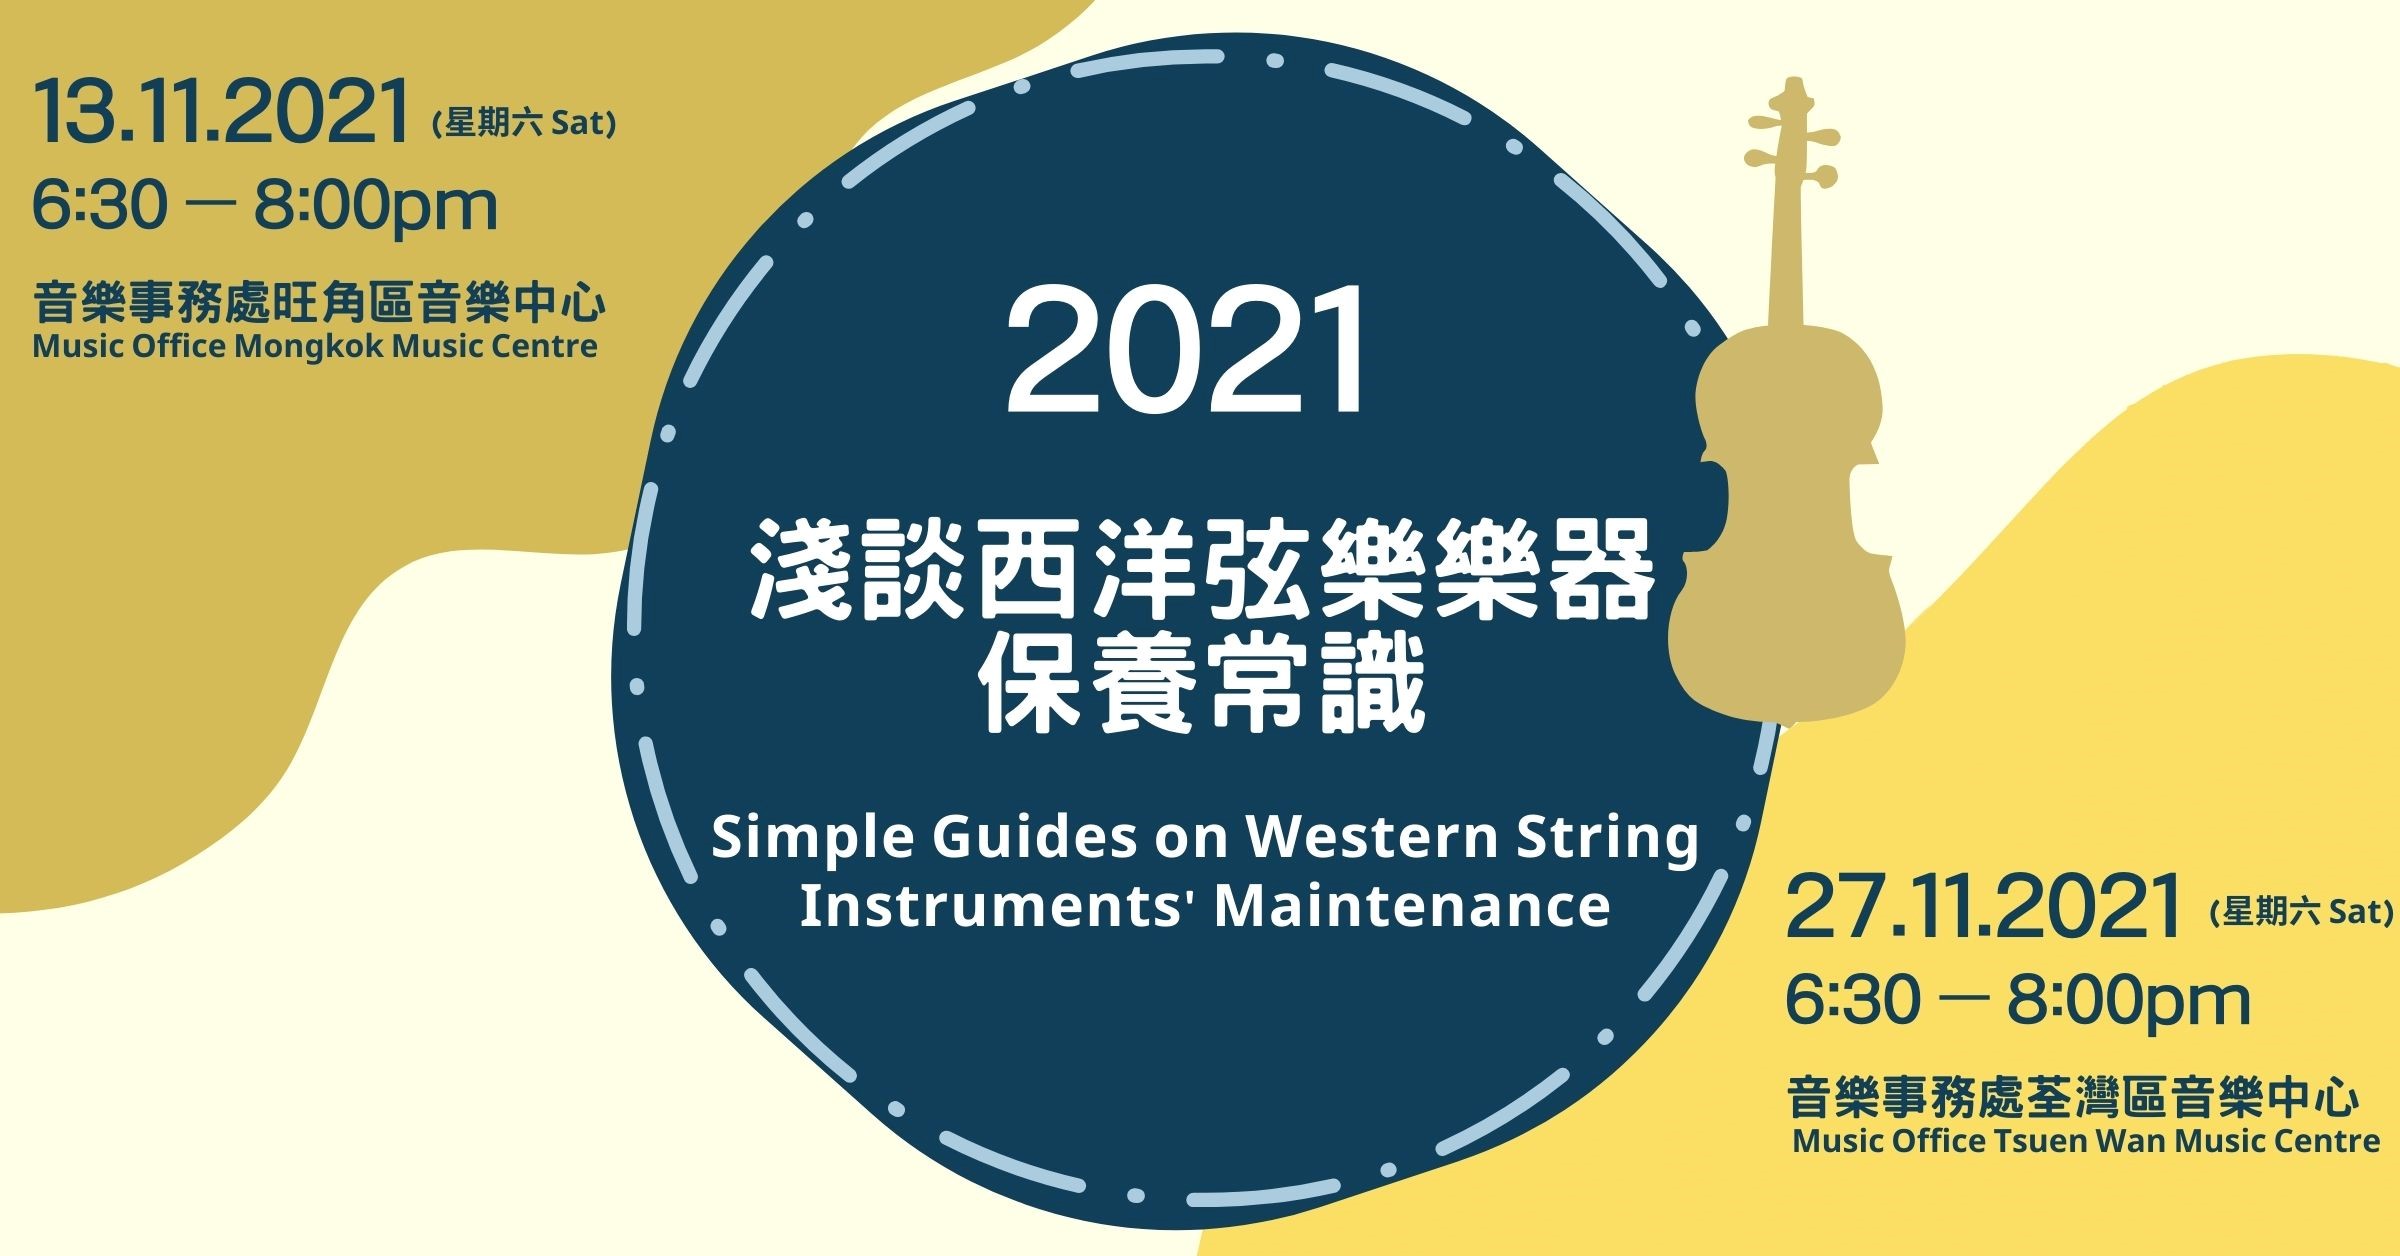 2021 Simple Guides on Western String Instruments' Maintenance (Completed)